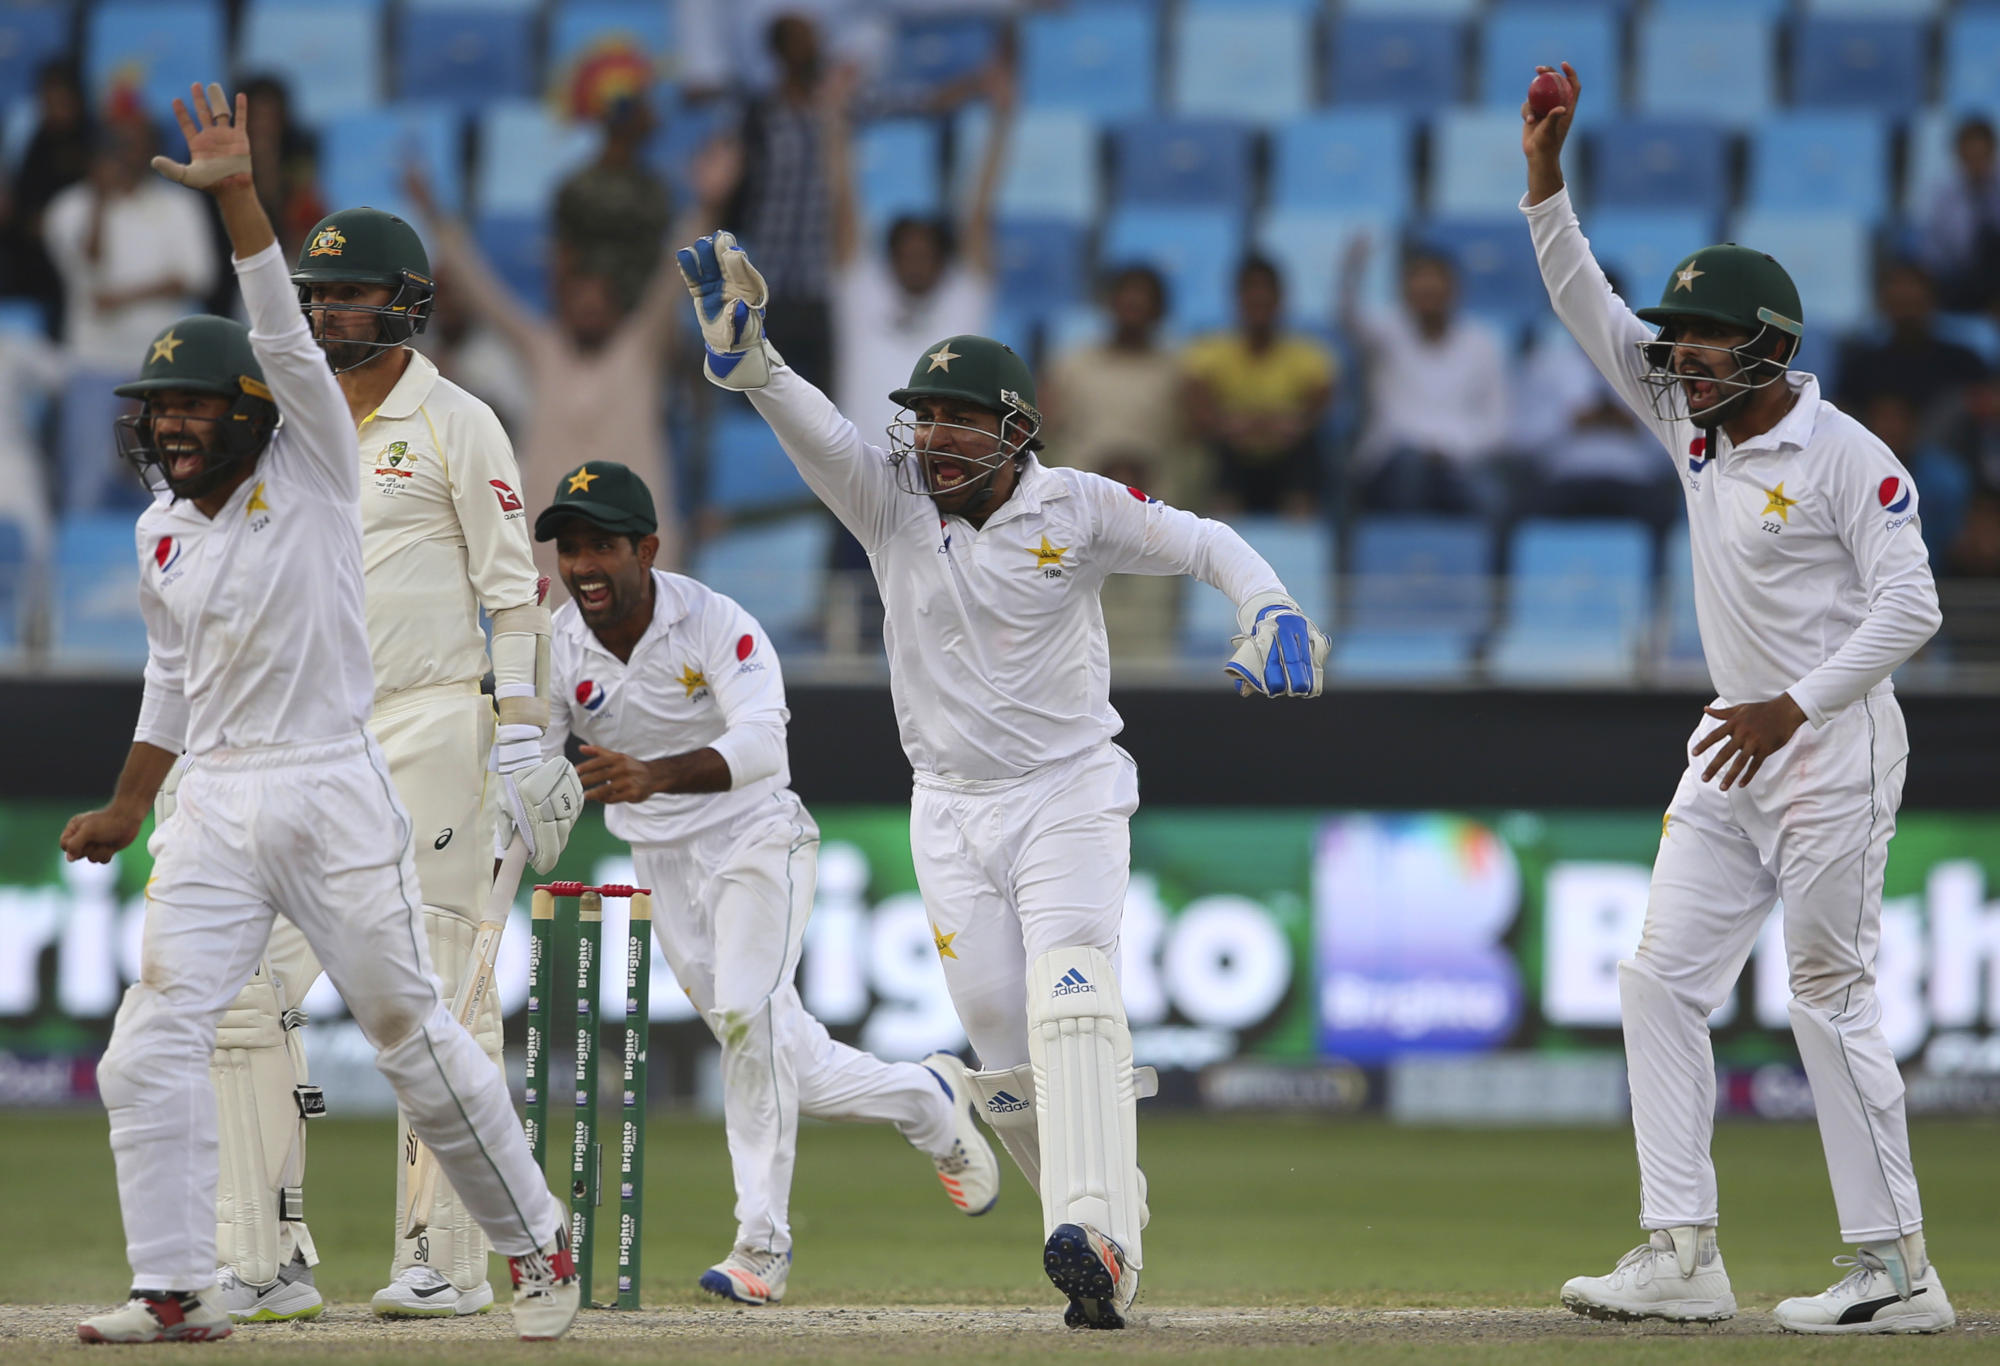 Pakistan wicketkeeper Sarfraz Ahmed appeals a wicket against Australia's Nathan Lyon with teammates